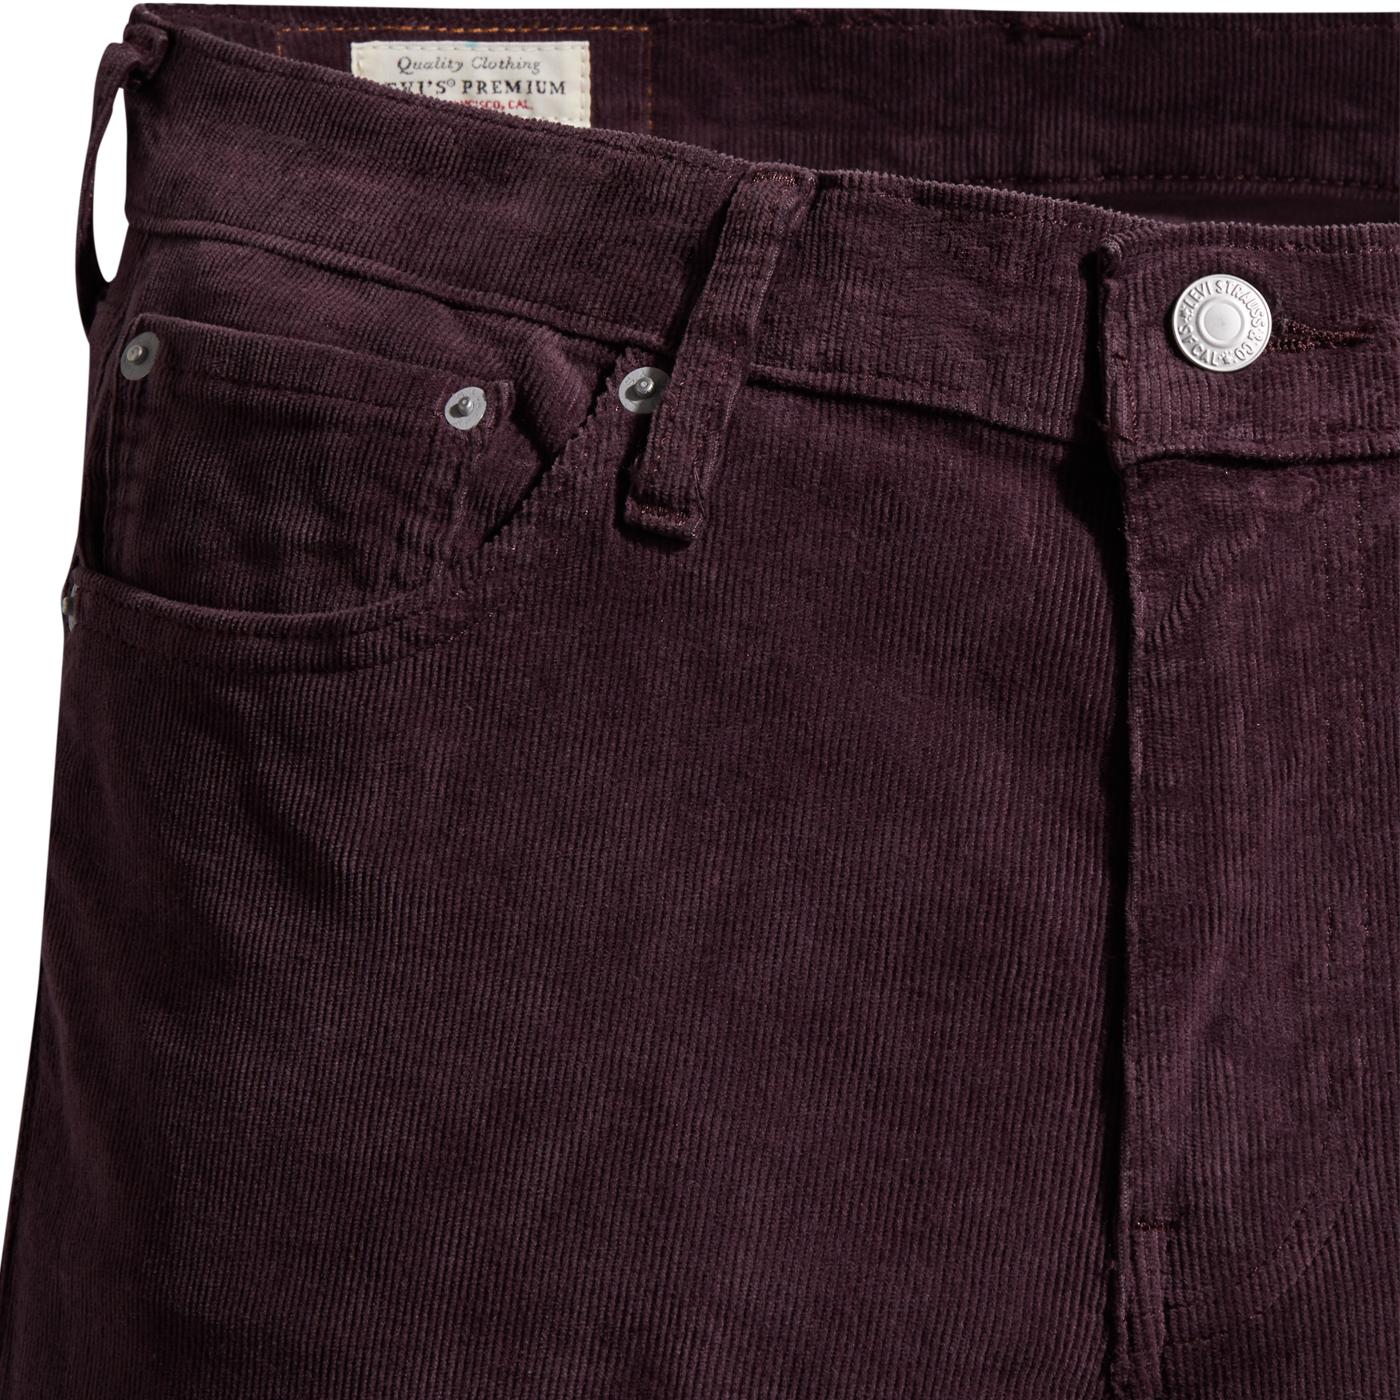 LEVI'S 511 Mod Slim 14W Needle Cord Trousers in Bayberry